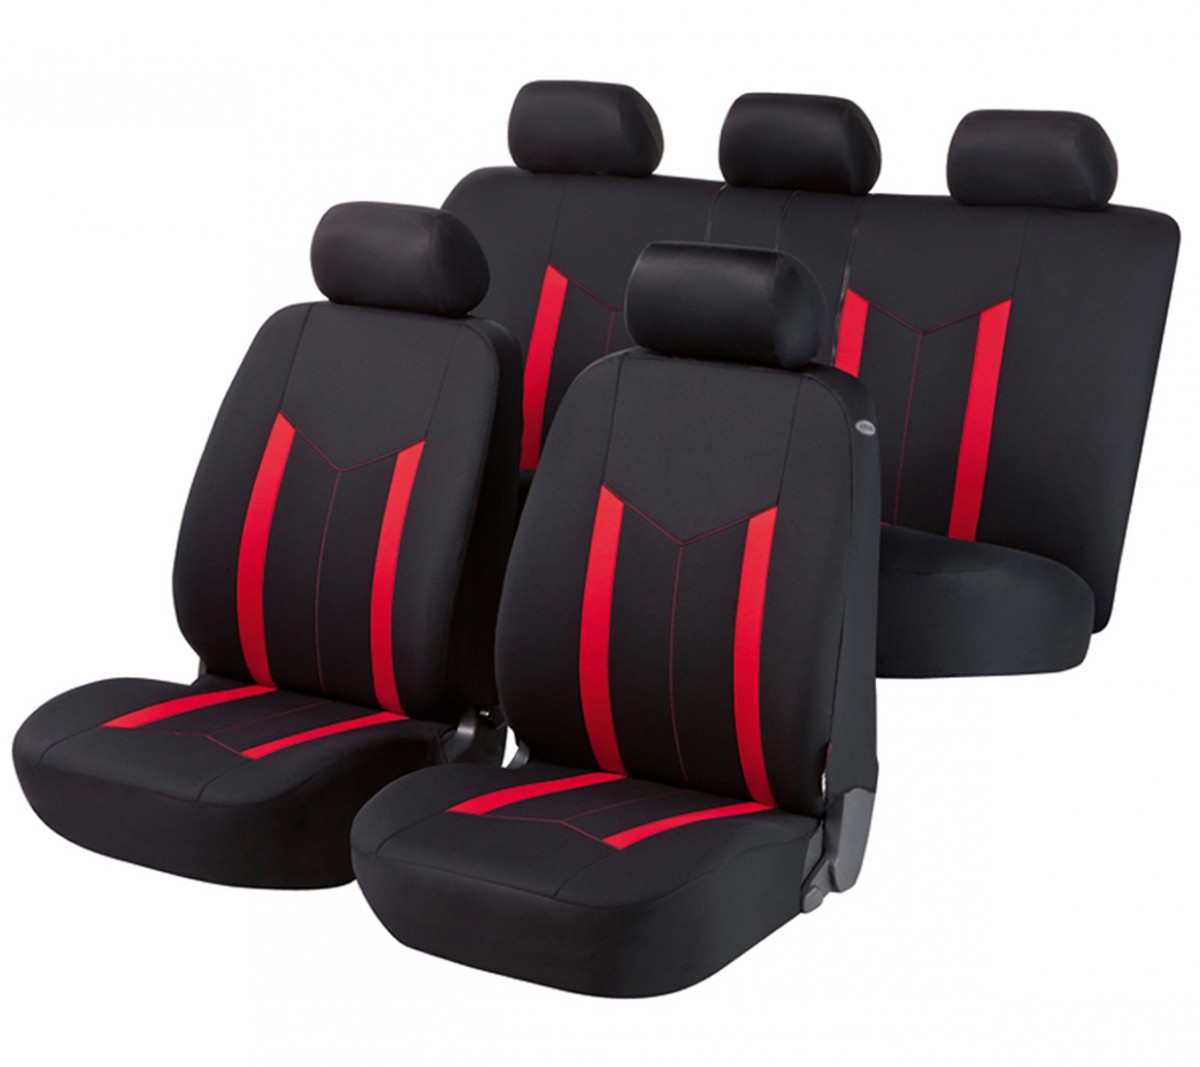 Ford KA Car seat covers , Proven Quality carseatcovers24.co.uk